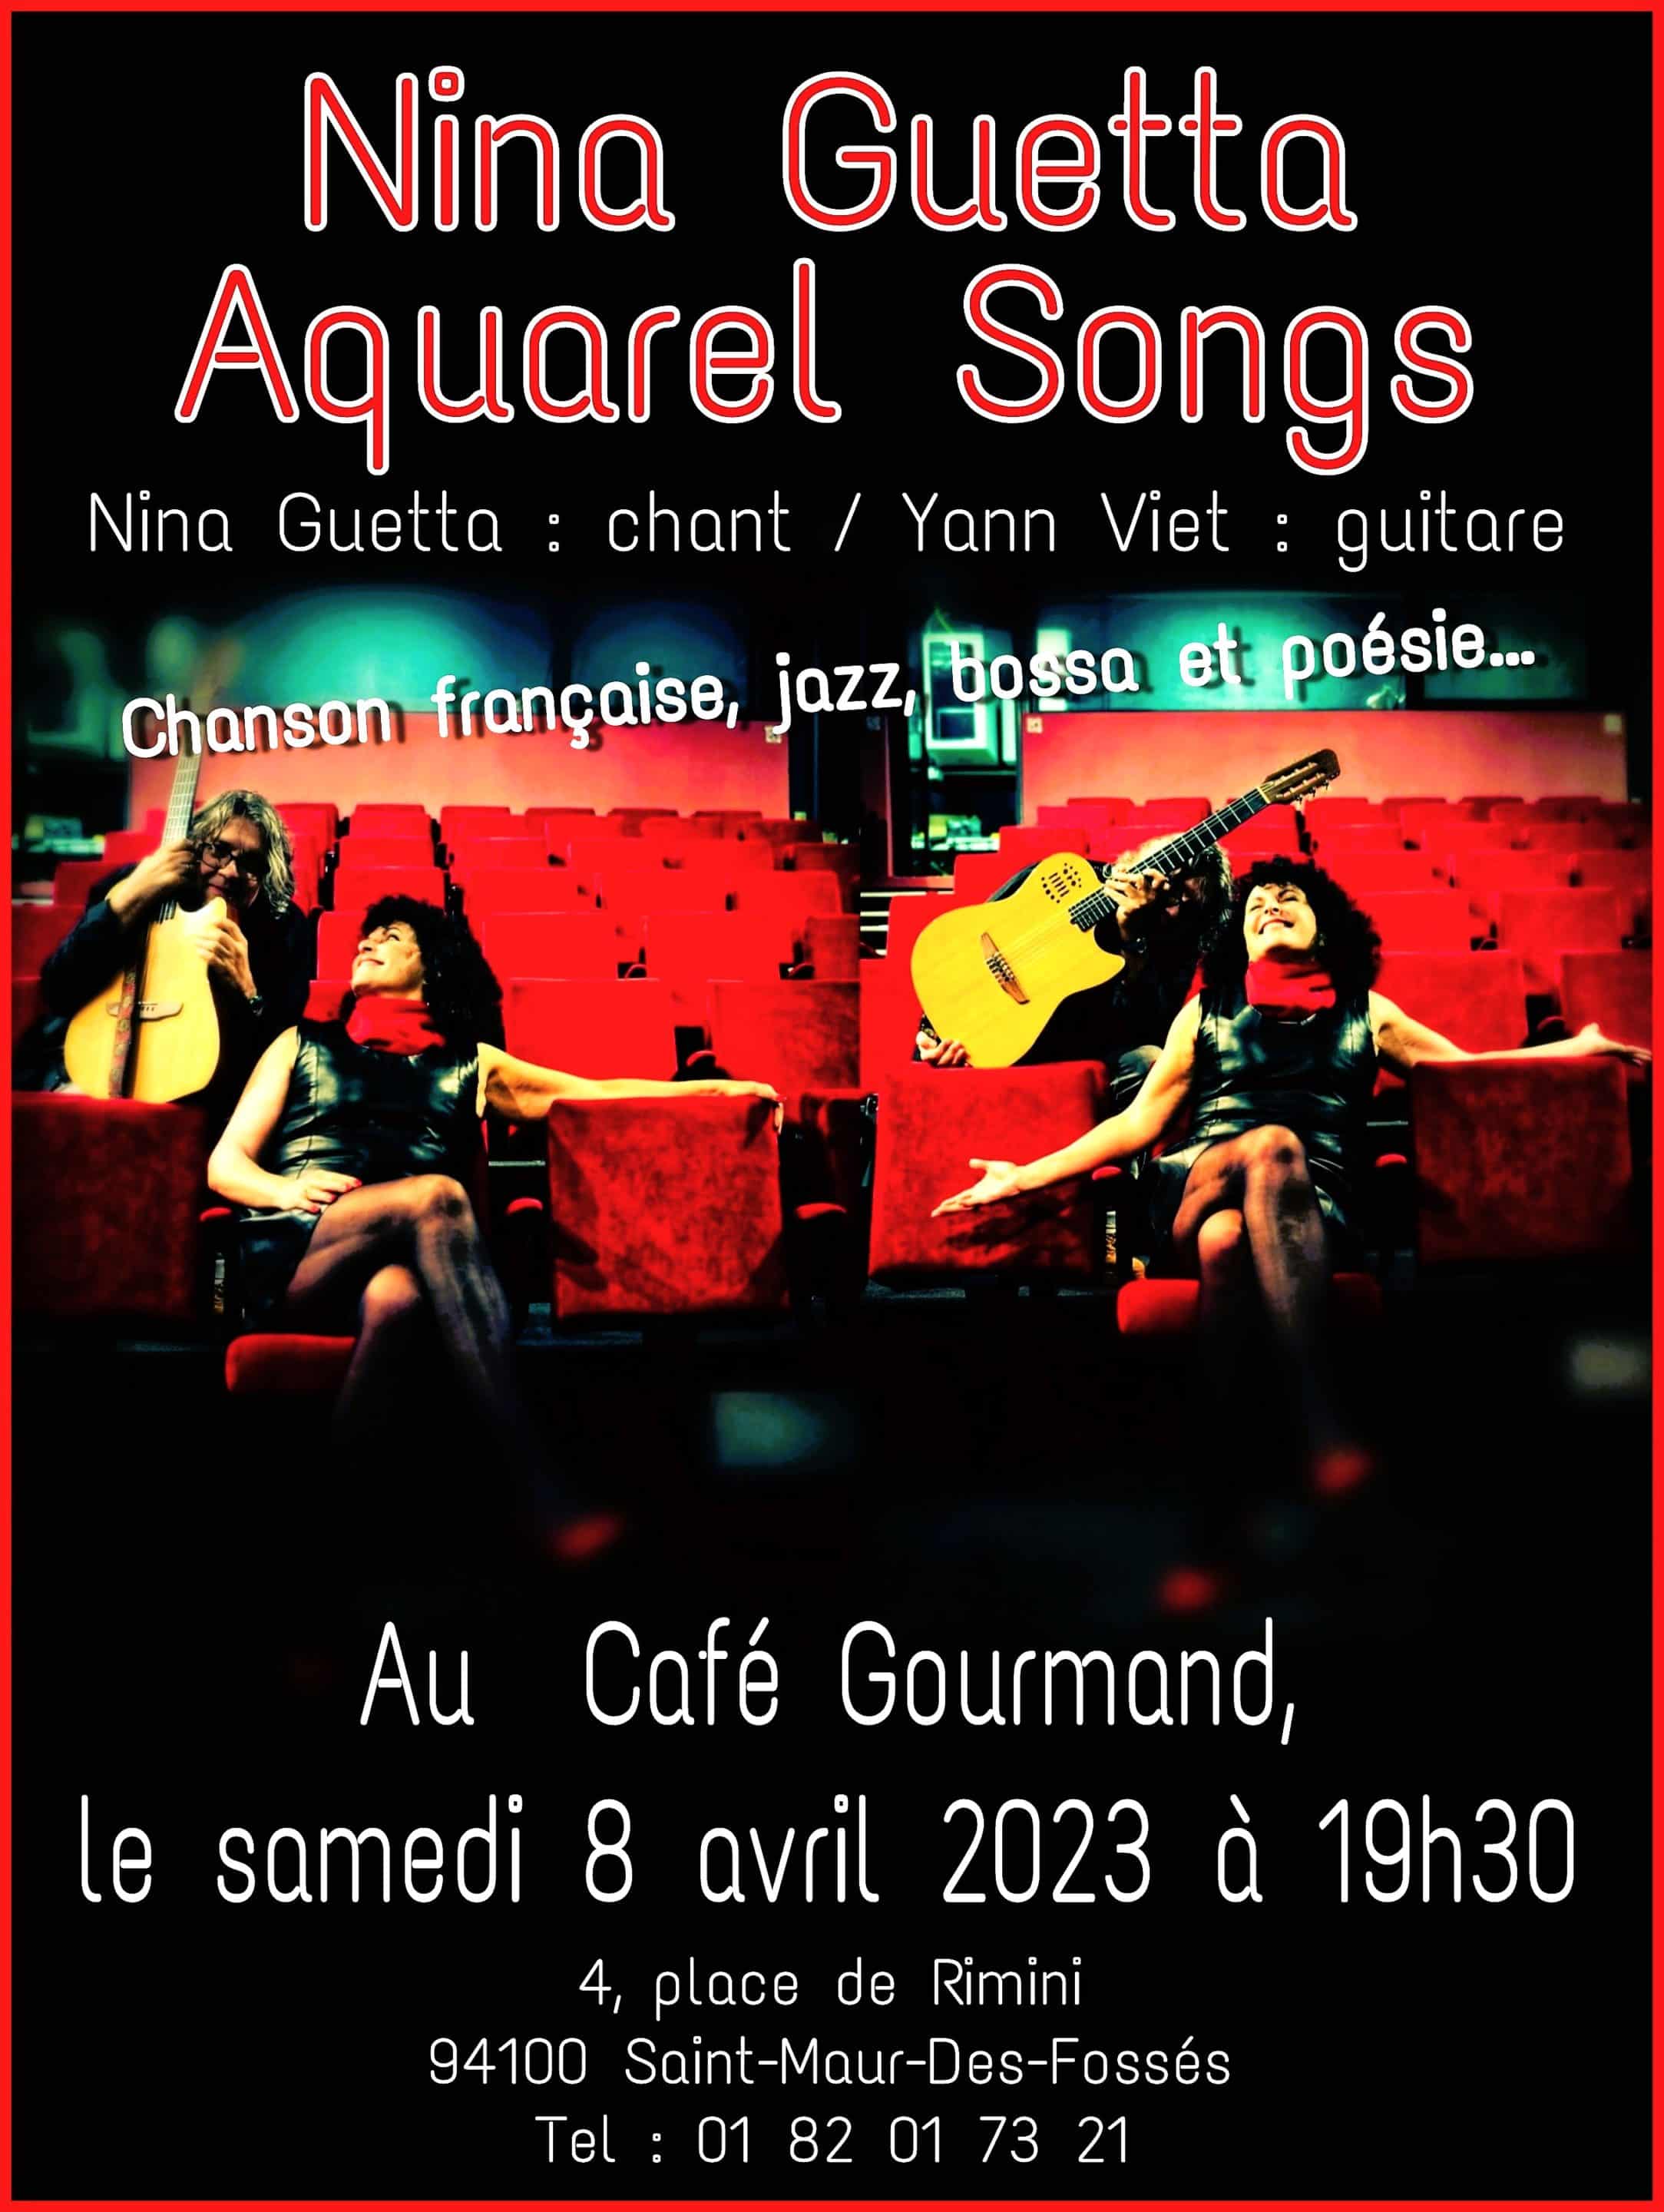 Concert at the Café Gourmand restaurant in Saint Maur, Saturday 8.04.23 from 7.30 o.m. – French song.